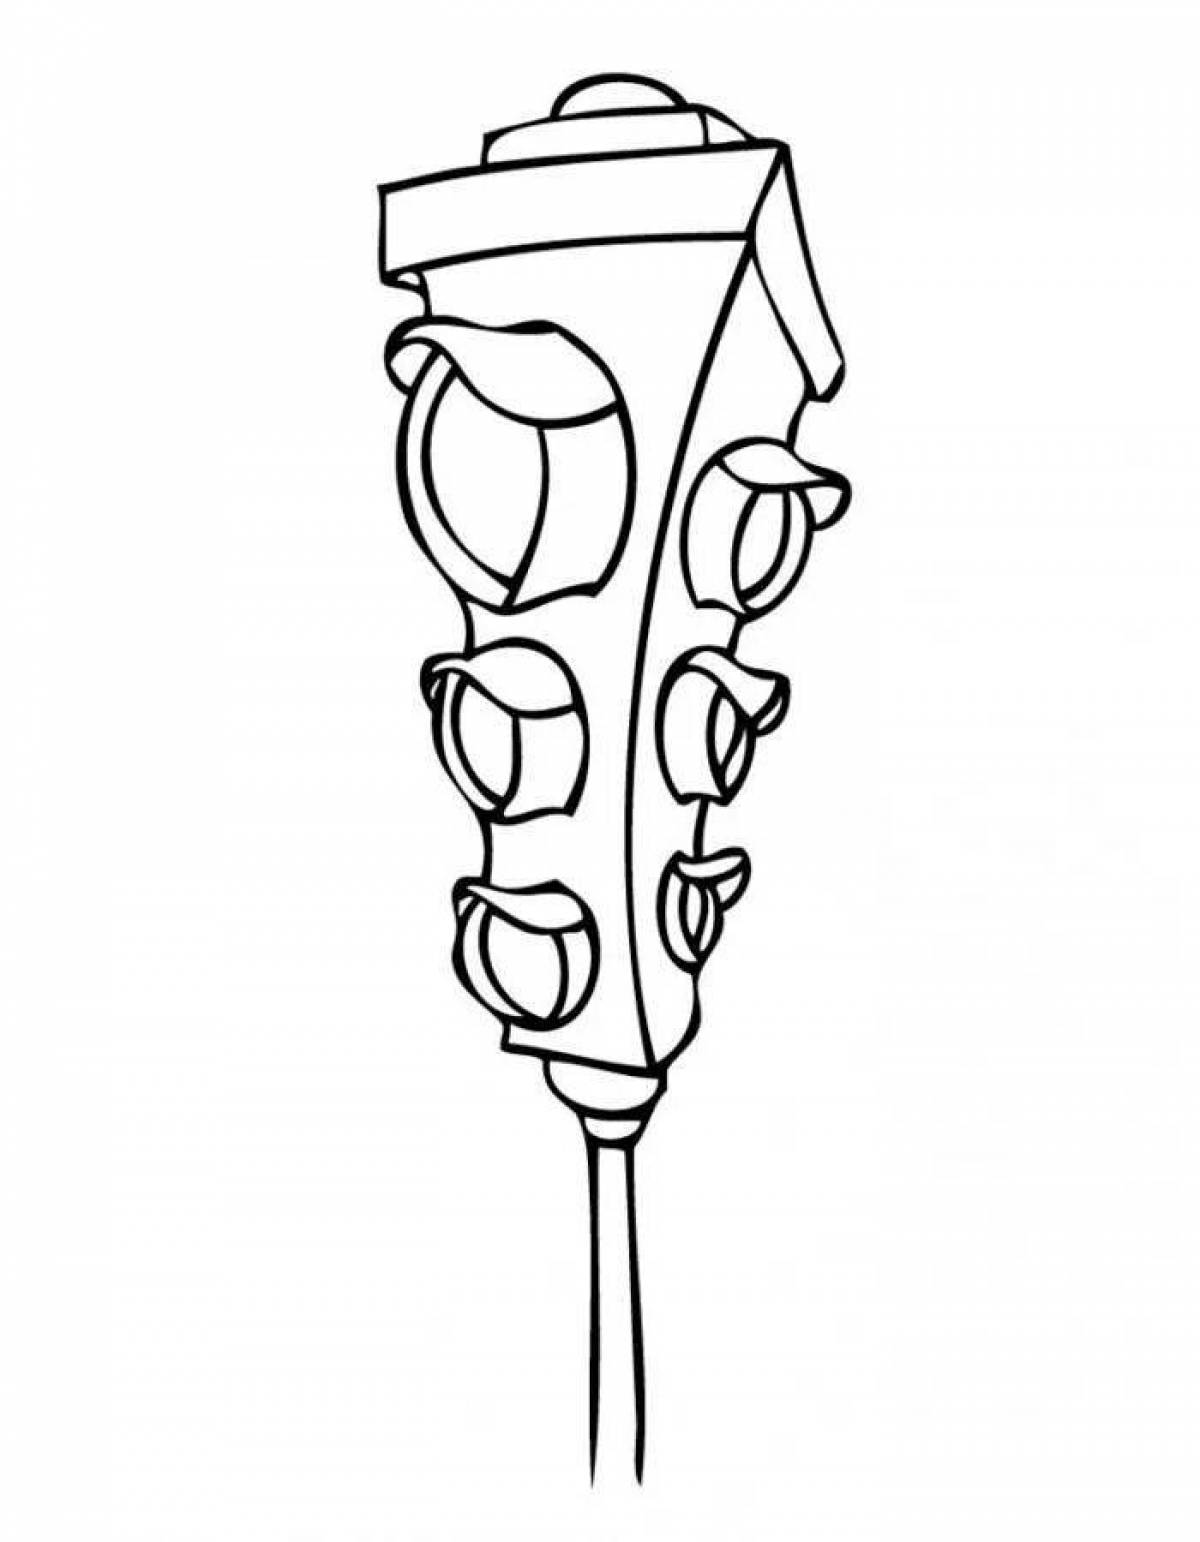 Adorable traffic light coloring page